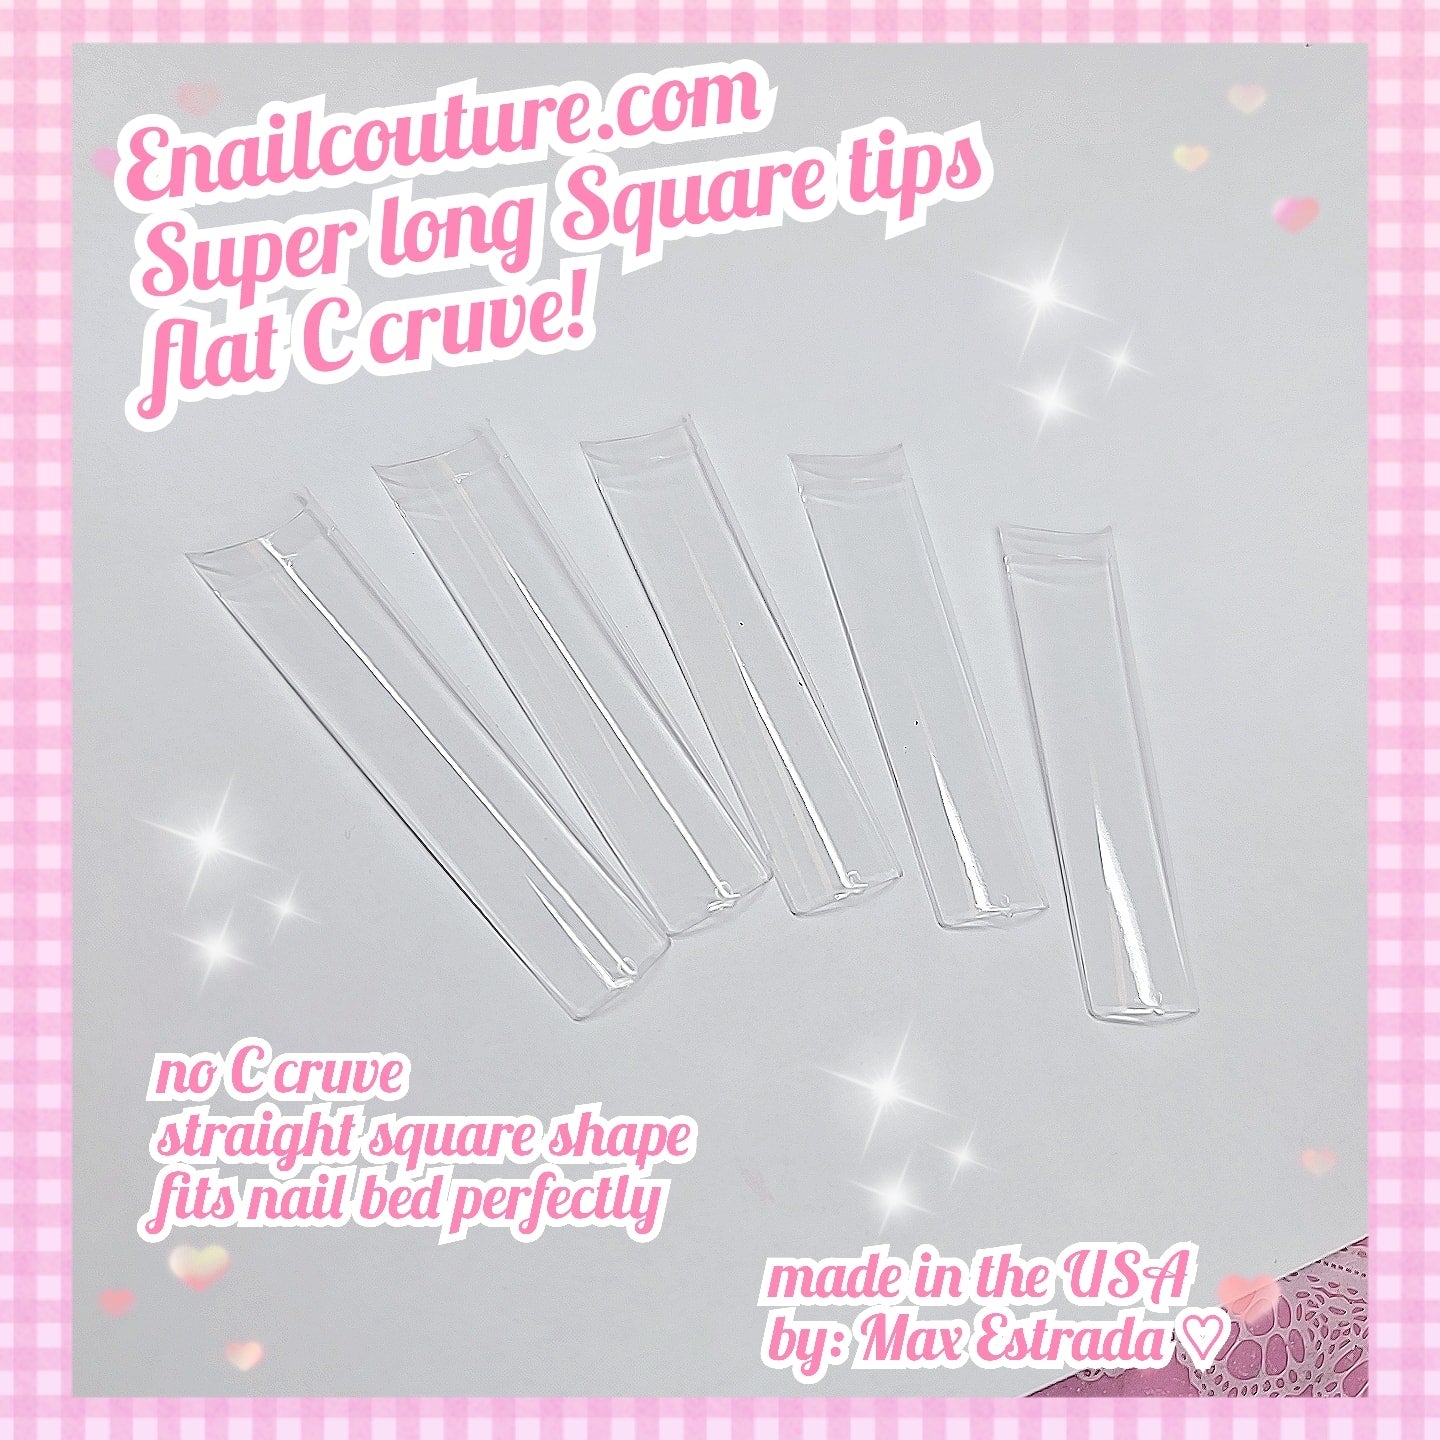 SUPER Long Square Tips/ flat C curve (Long No C Curve Straight Square Nail Tips - Flattened XXXL None Curve Fake Nail Tips Half Cover Flat Square Nails Tips Clear )